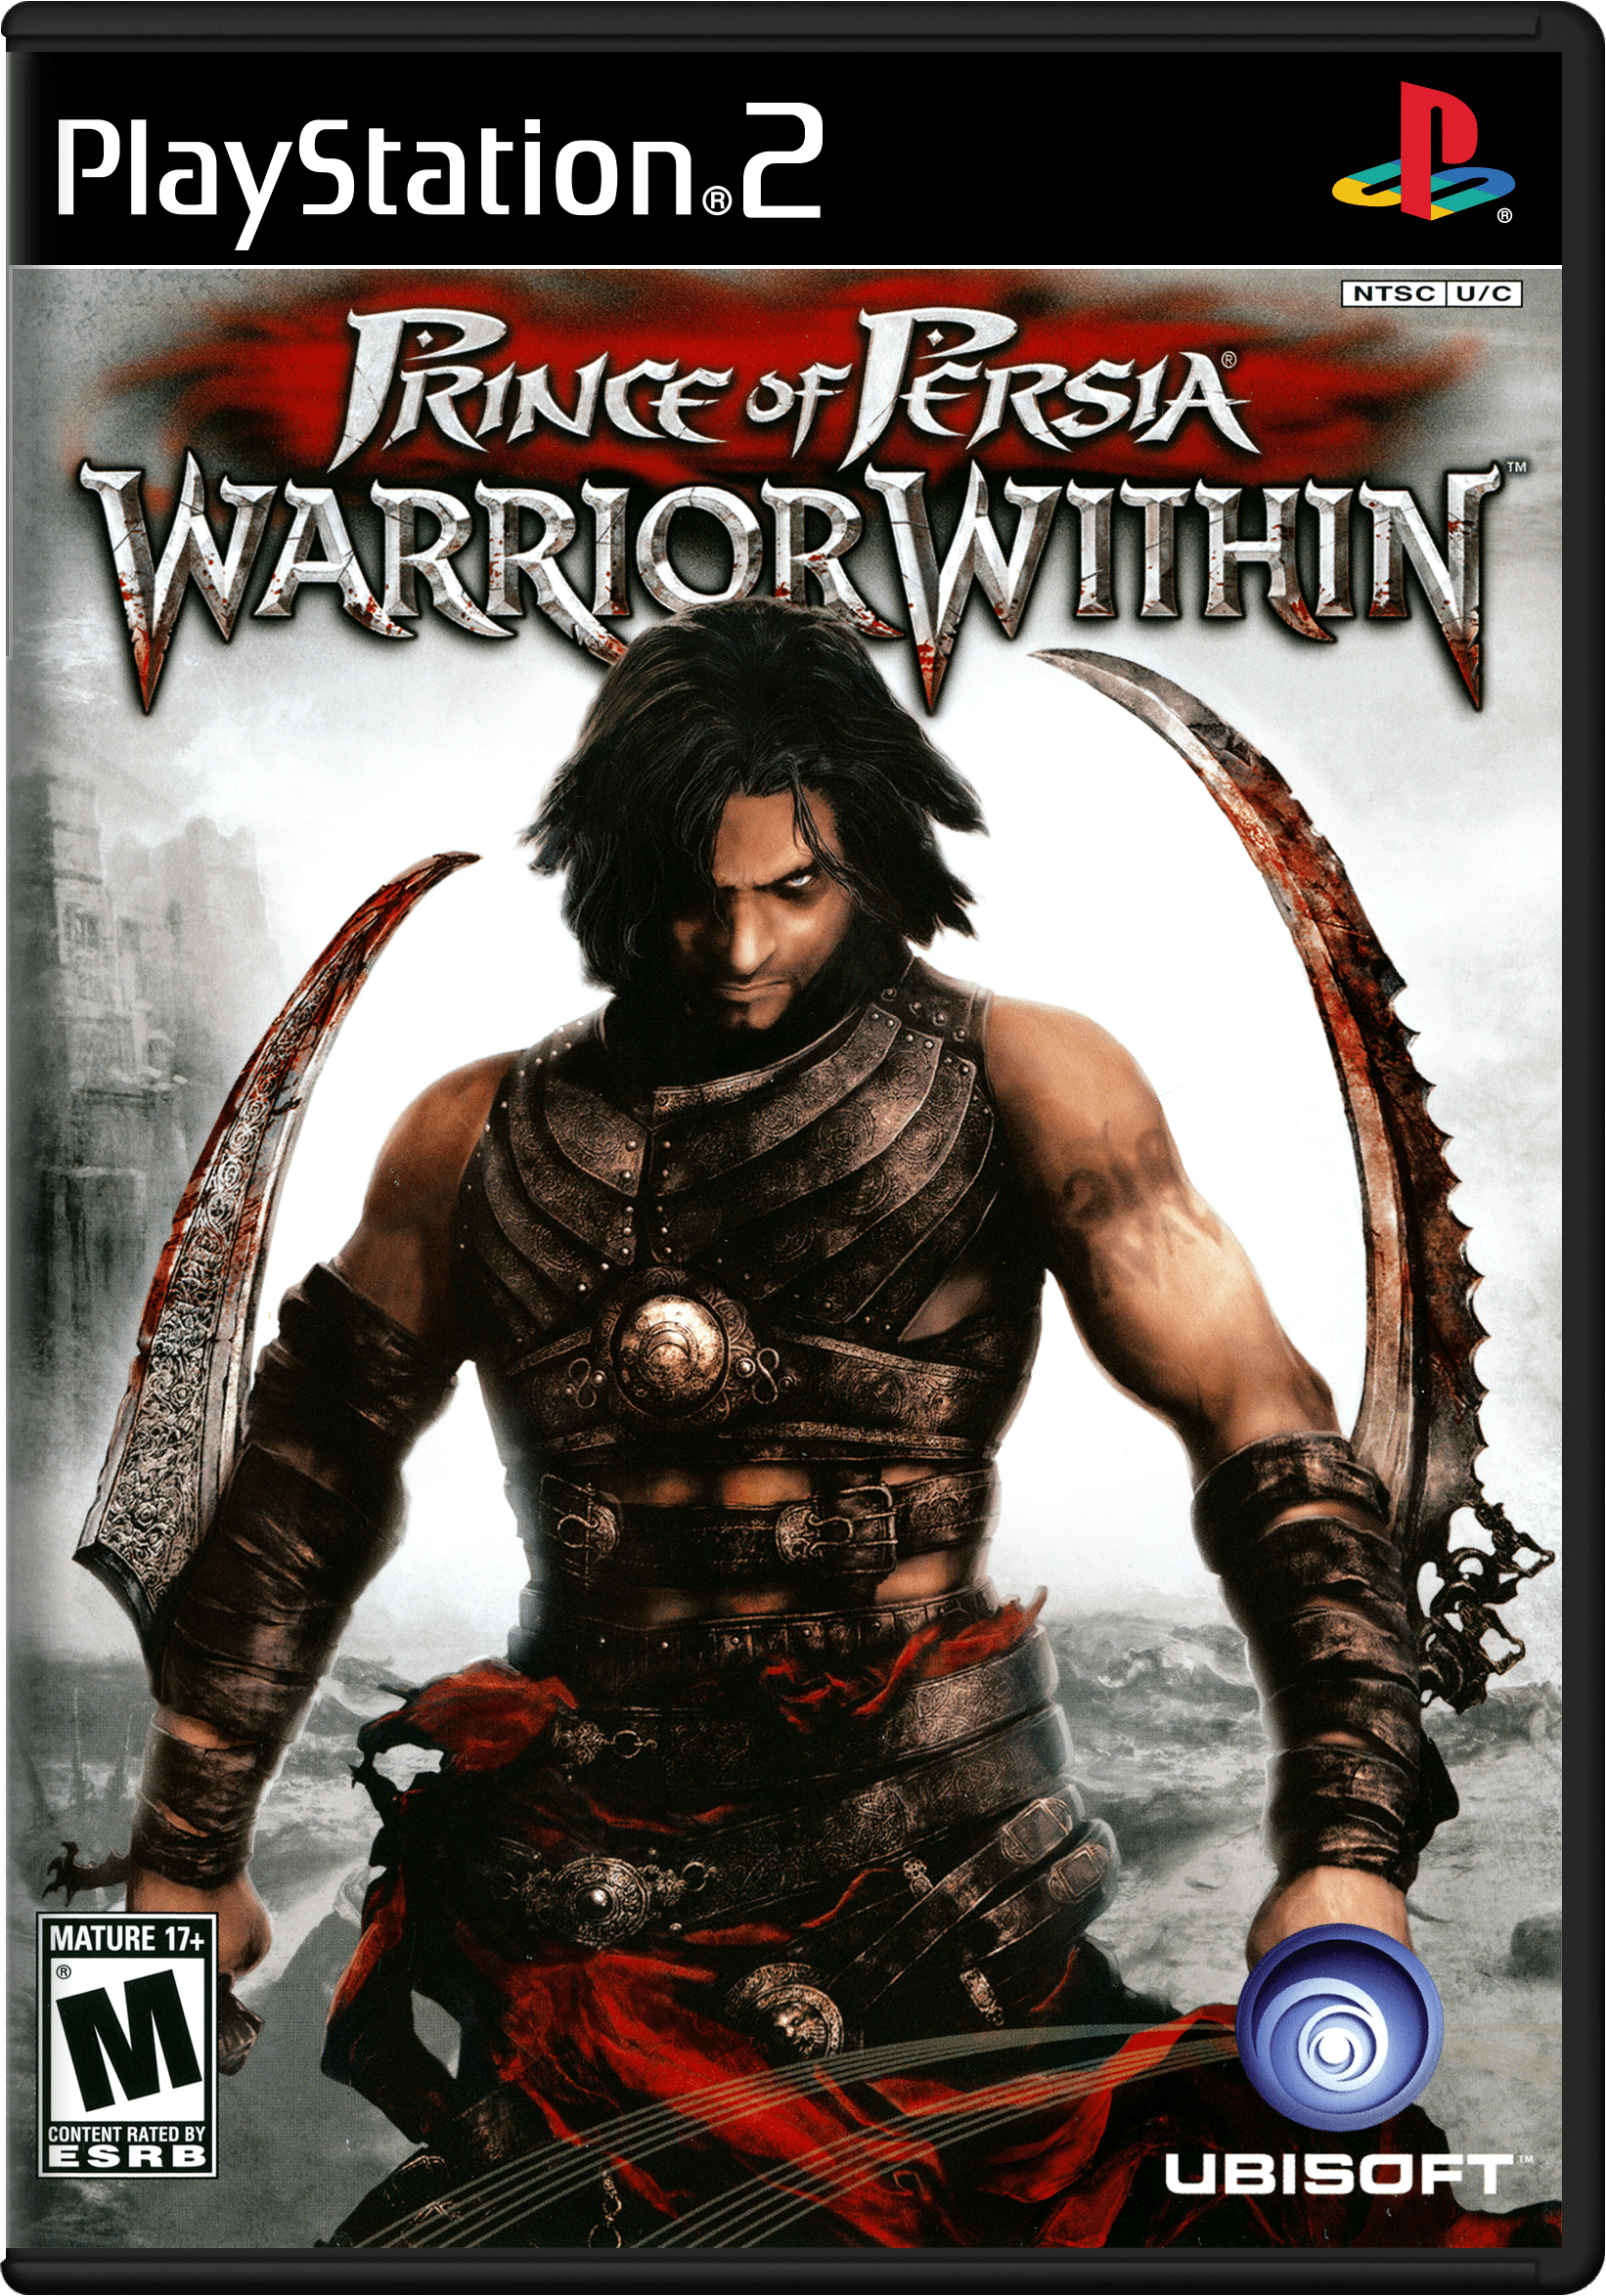 Prince of Persia: The Two Thrones Images - LaunchBox Games Database